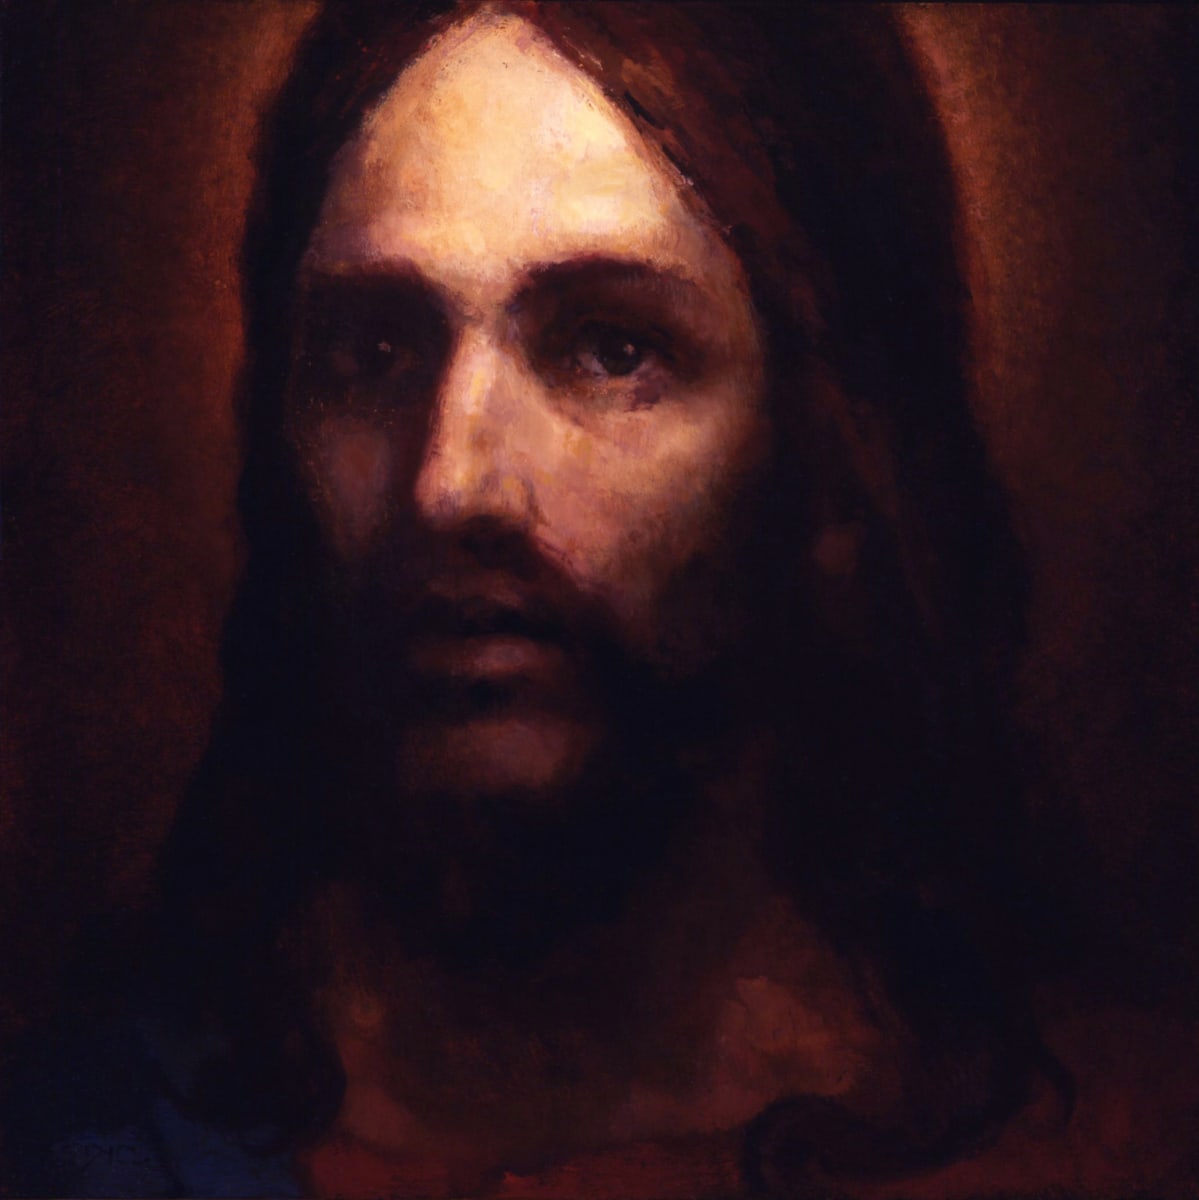 Christ, the Vine by J. Kirk Richards  Image: Christ portrait from a series completed in 2009. 